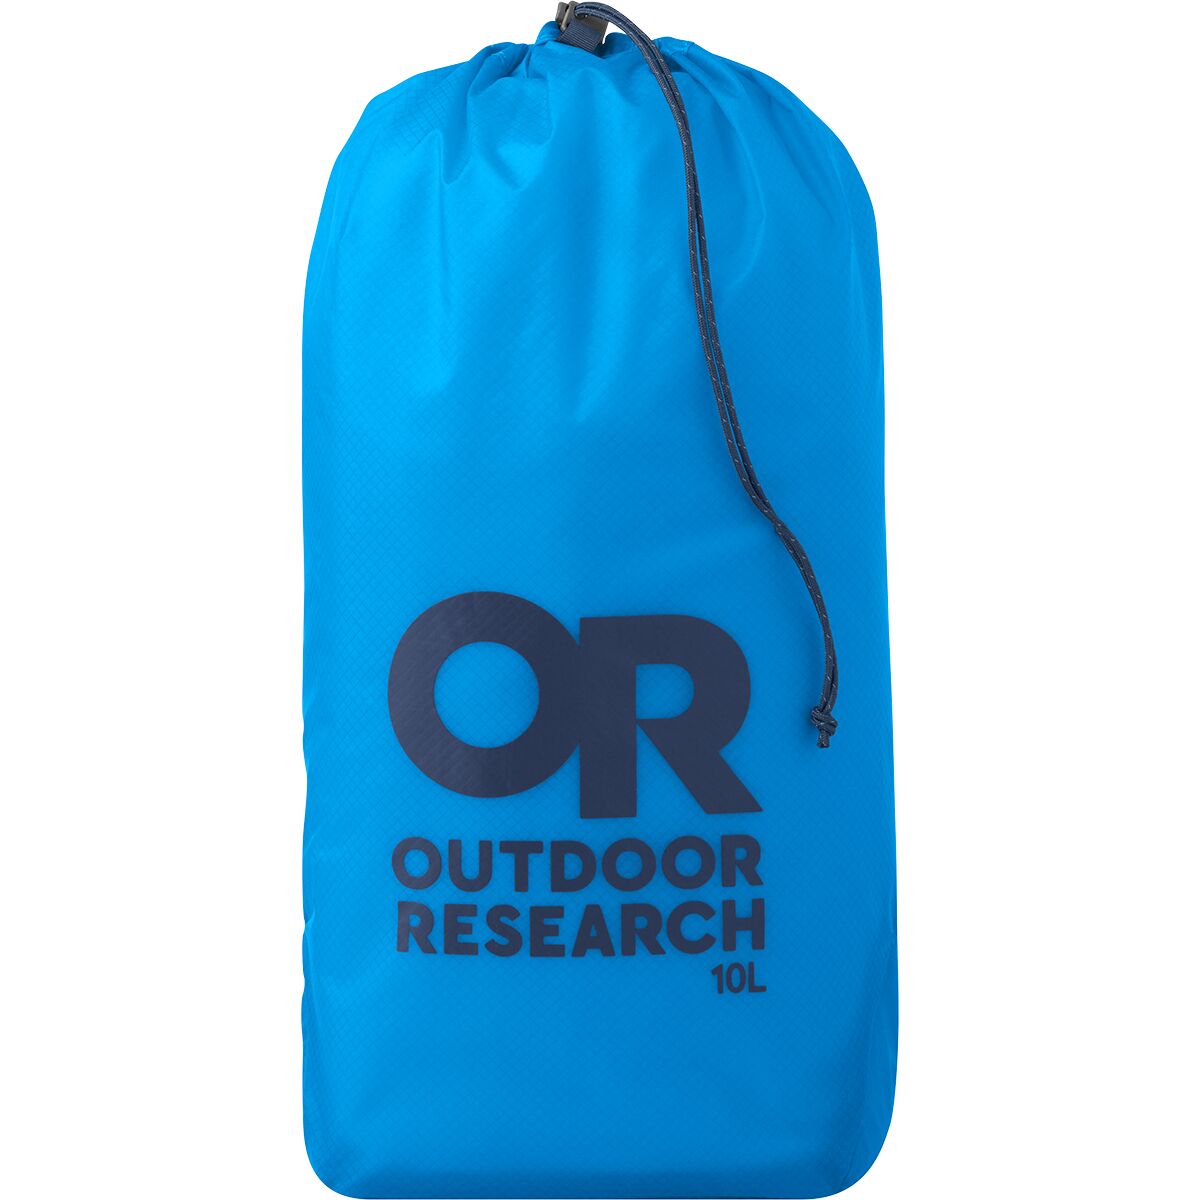 Outdoor Research PackOut Ultralight 10L Stuff Sack